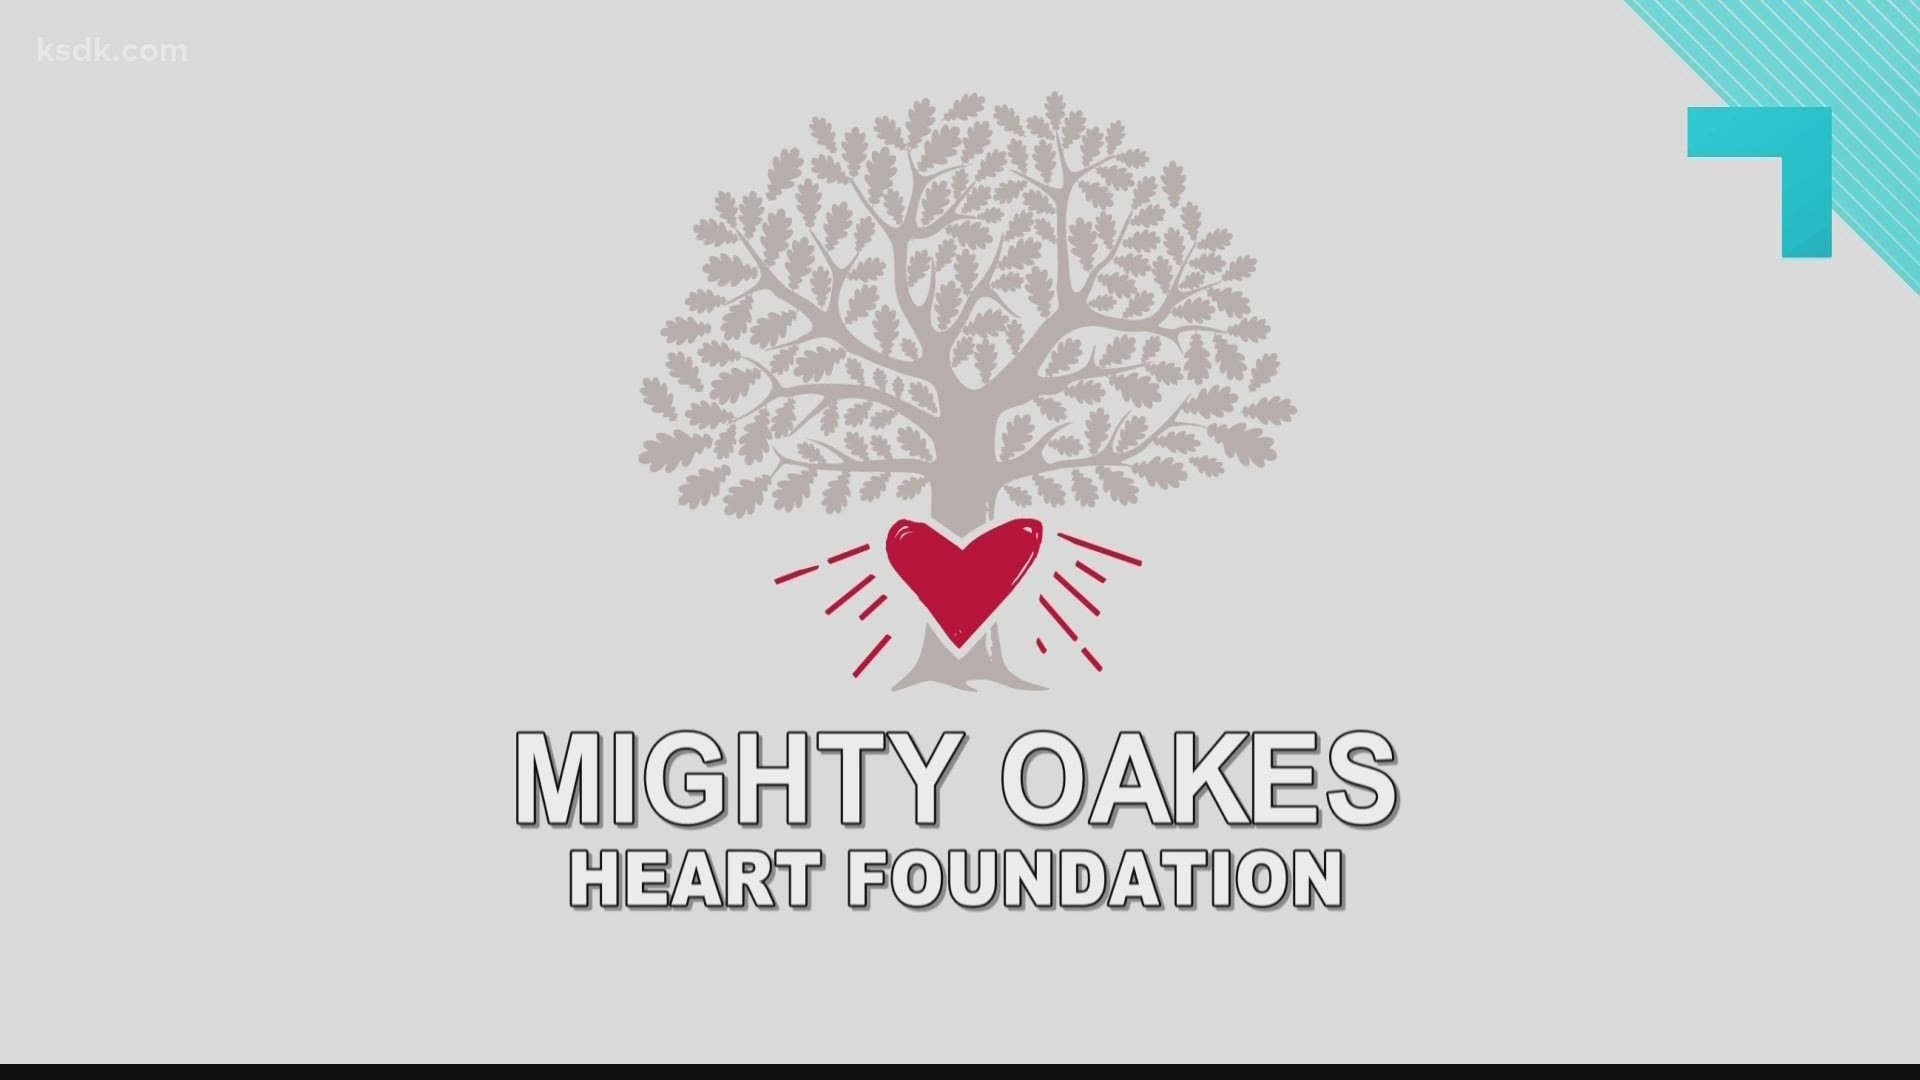 Follow the Mighty Oakes Heart Foundation journey.